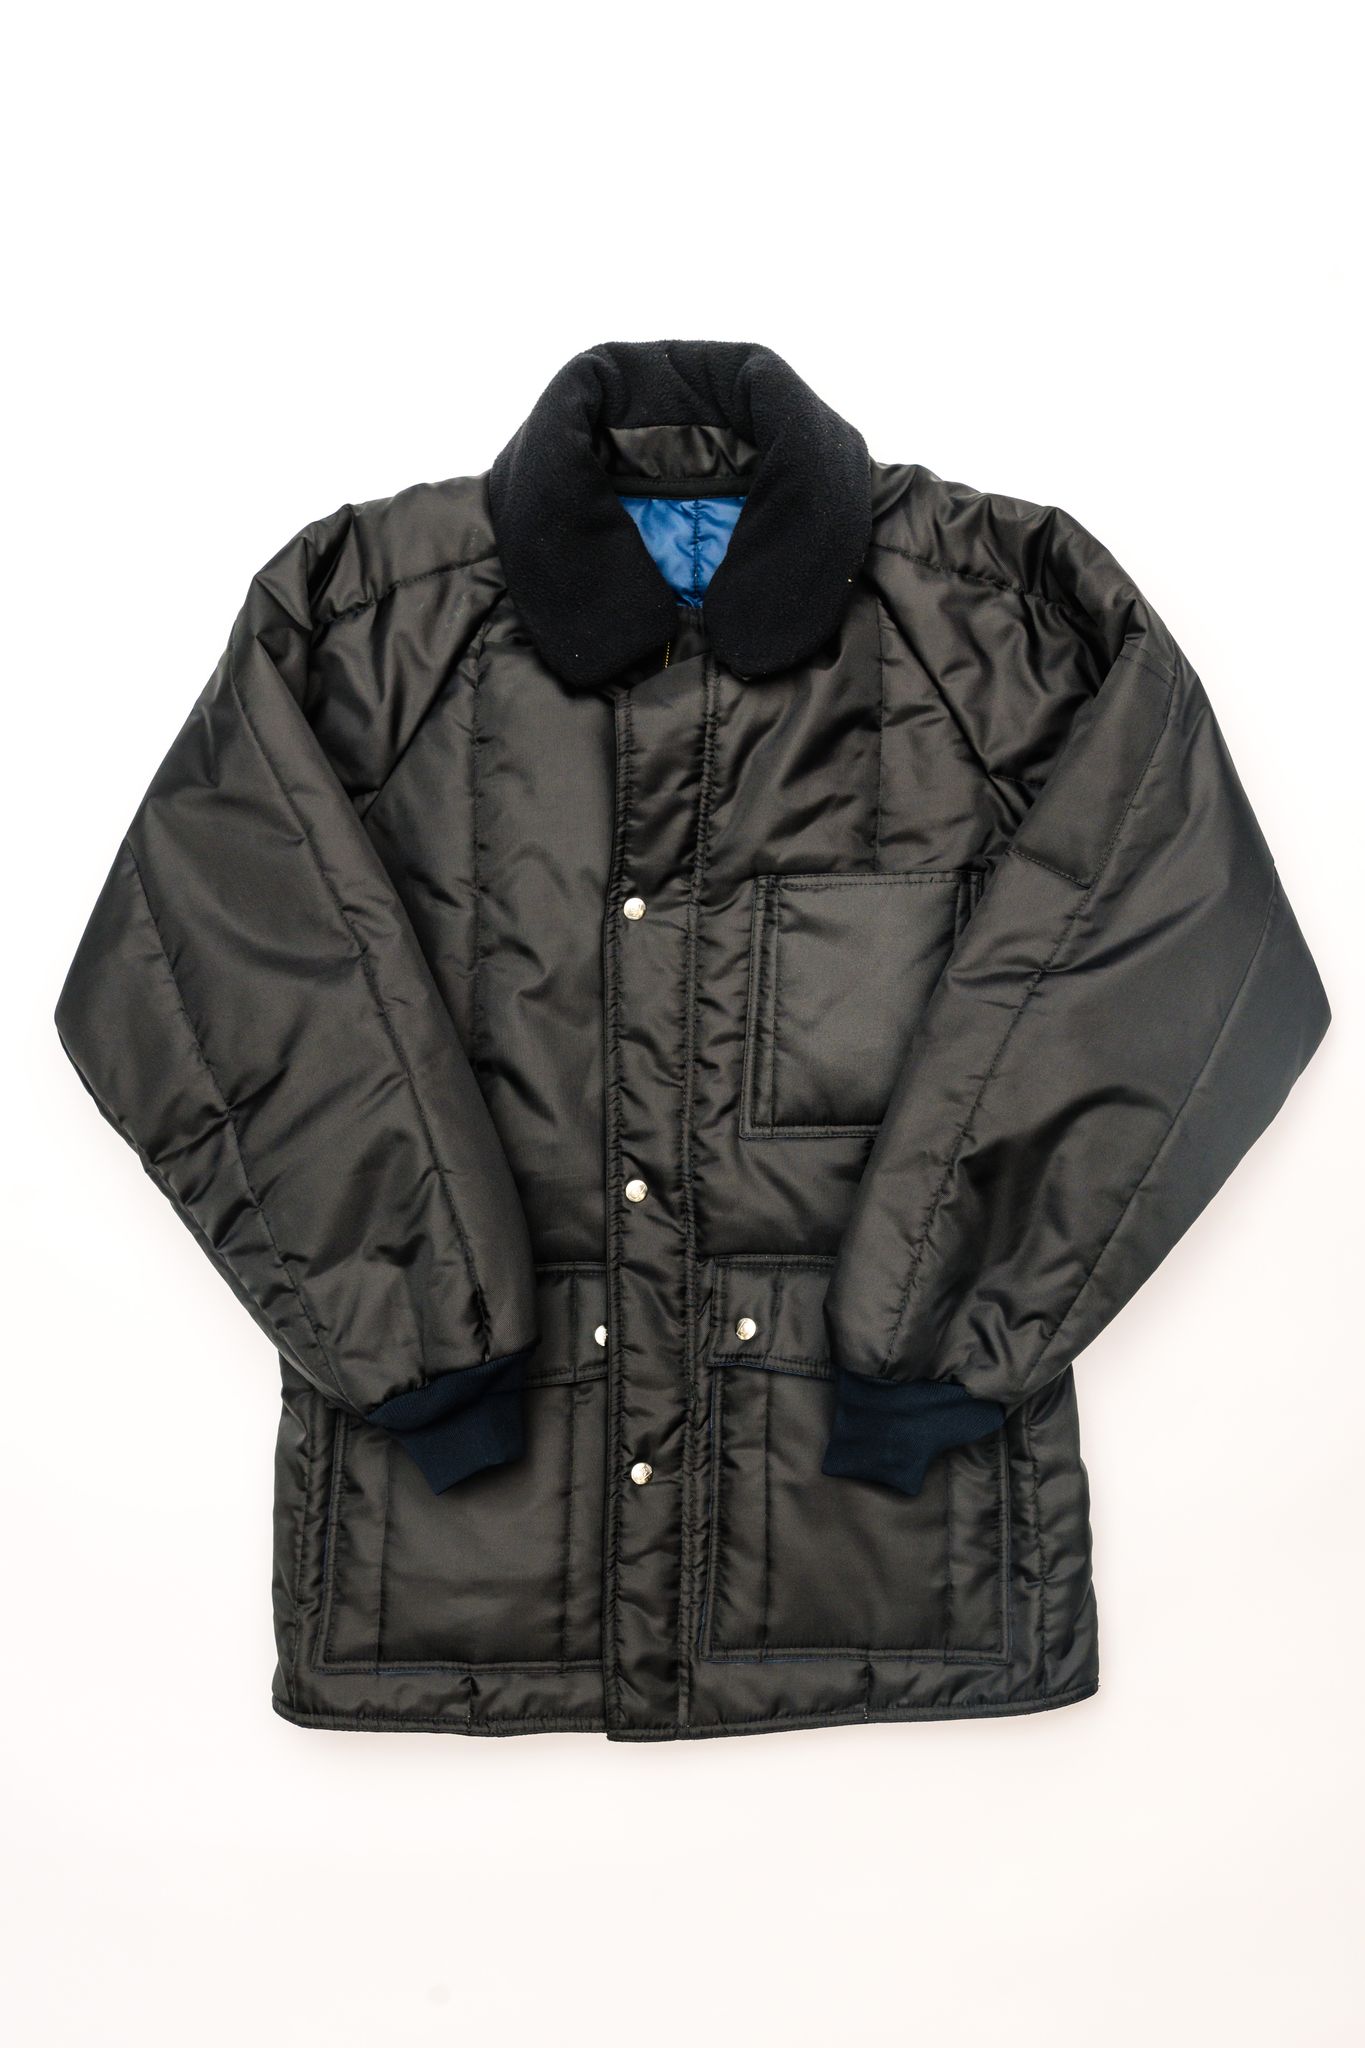 Insulated Bering Jacket - DI202 - Dickson Industries Inc.